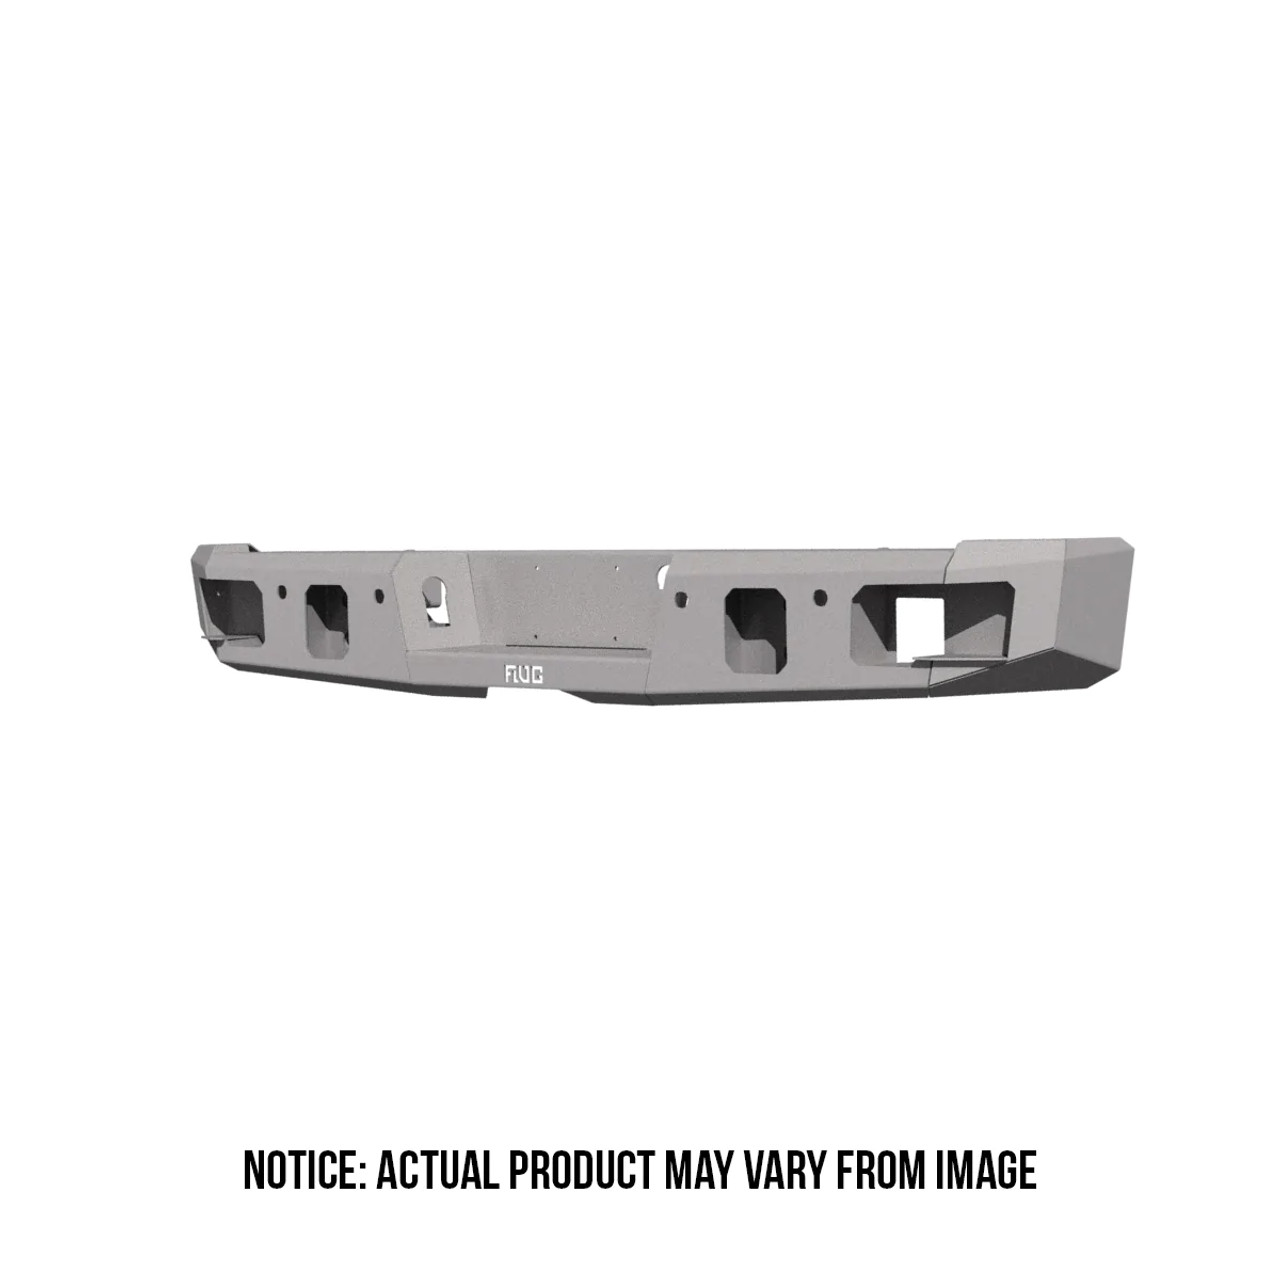 Flog WS Series REAR BUMPER - 2011-2014 Chevy 2500-3500 - Angle View